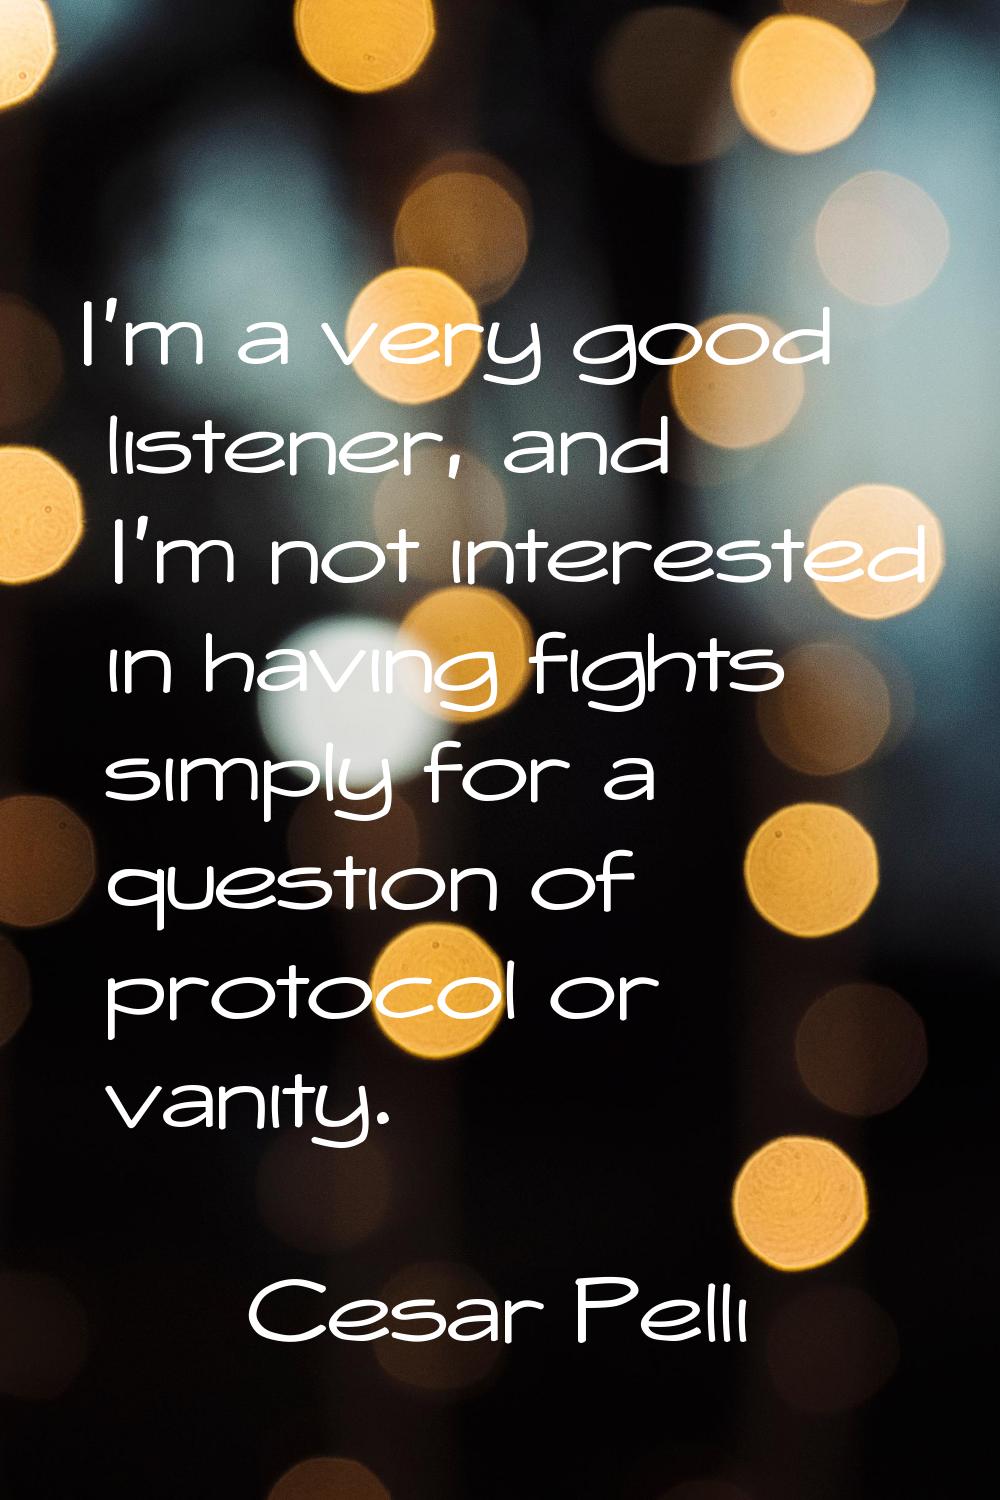 I'm a very good listener, and I'm not interested in having fights simply for a question of protocol